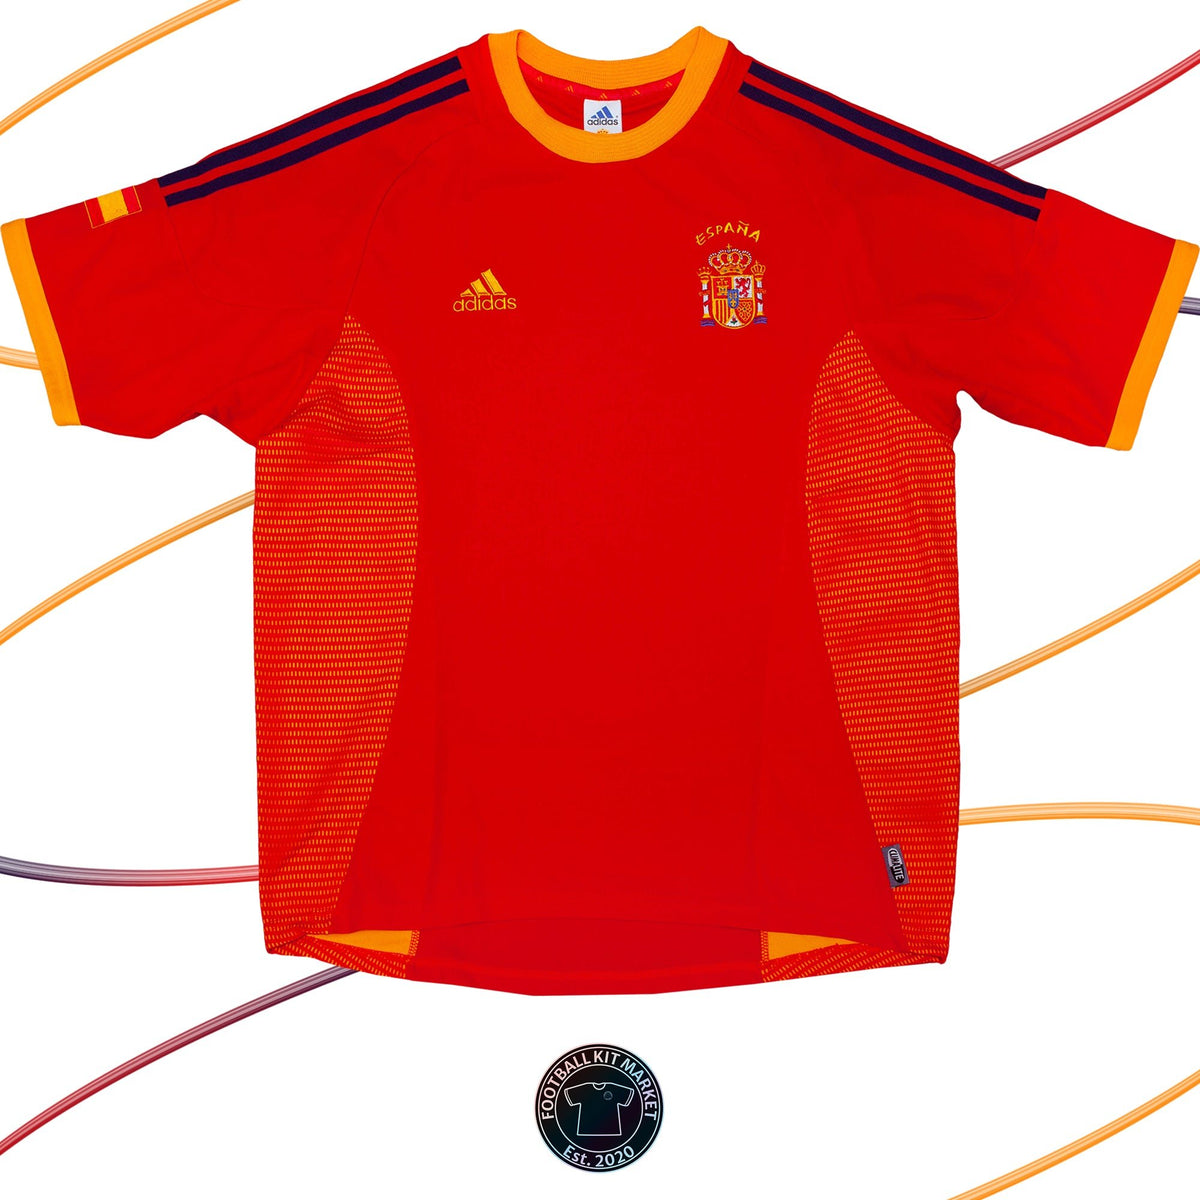 Genuine SPAIN Home (2002-2003) - ADIDAS (L) - Product Image from Football Kit Market